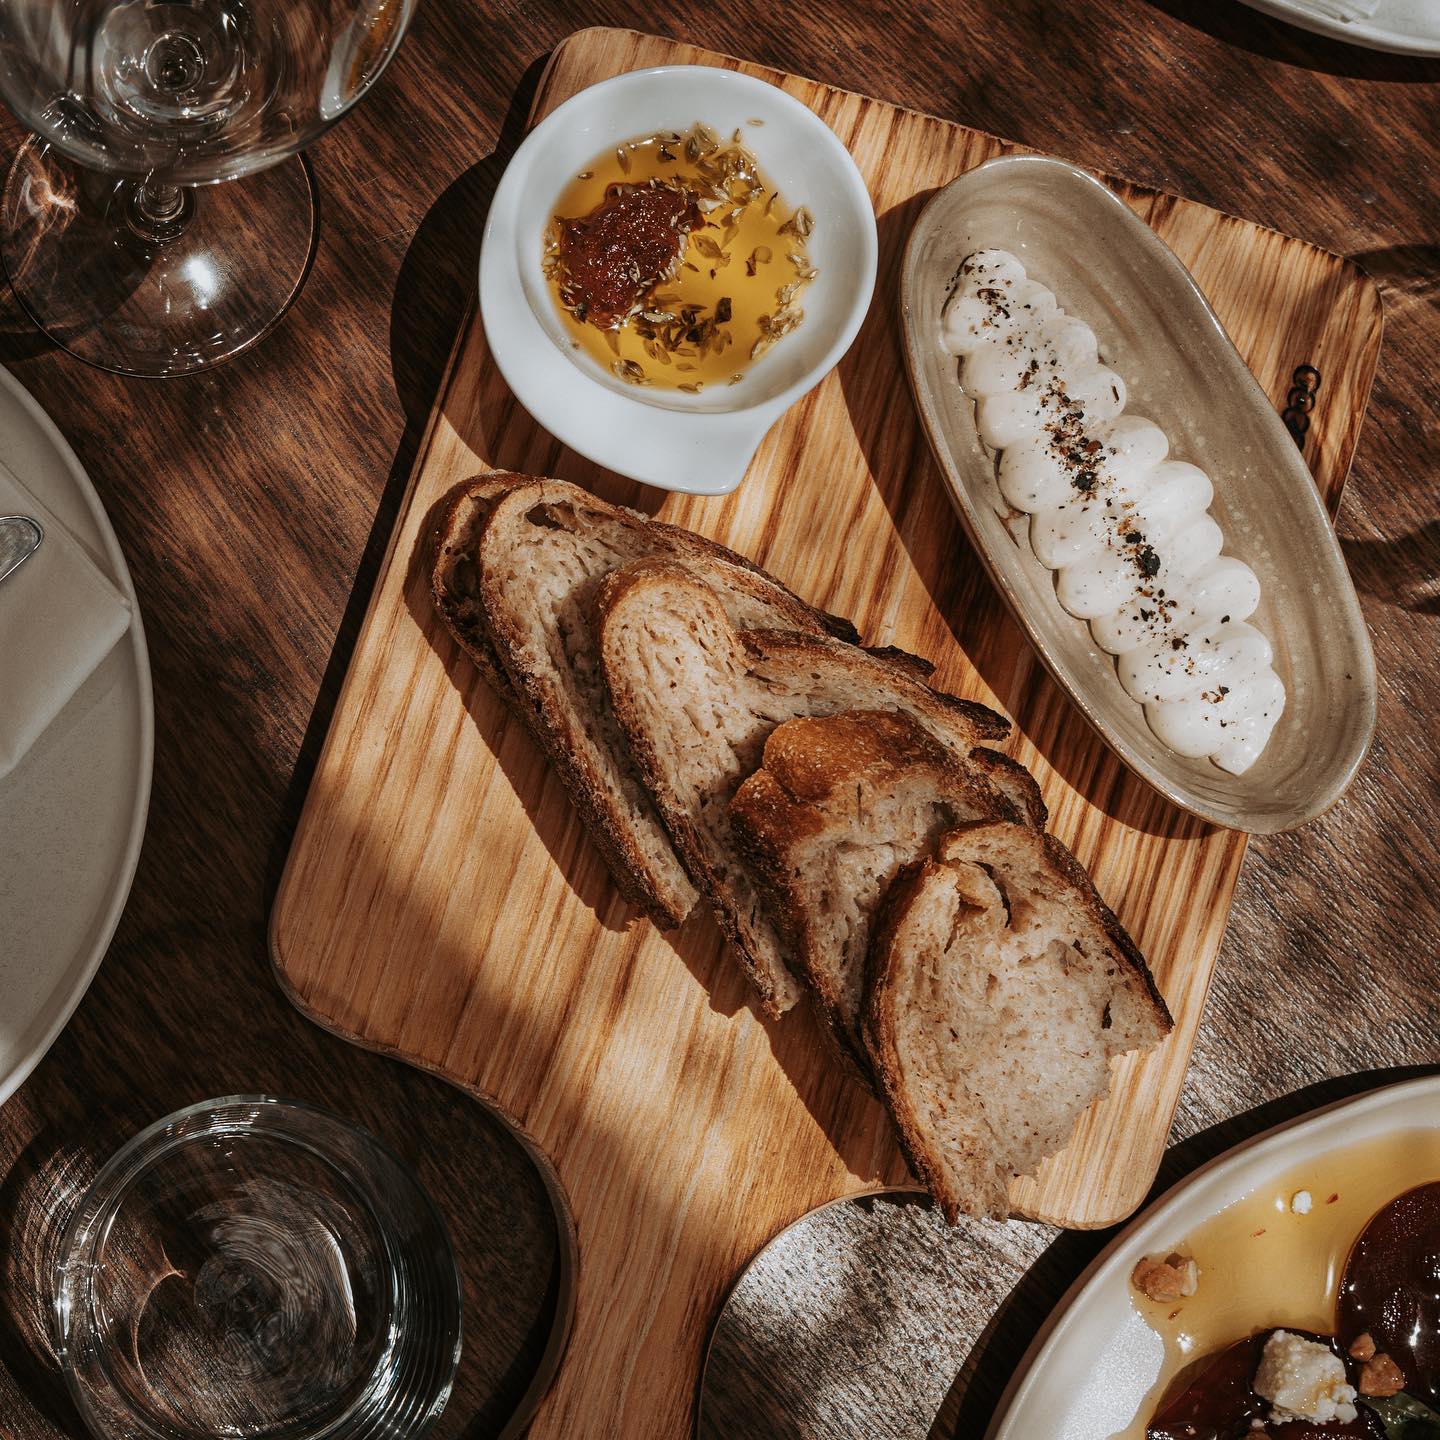 Gleba’s distinctive bread recipe paired with a piquand harissa olive oil and smoked butter